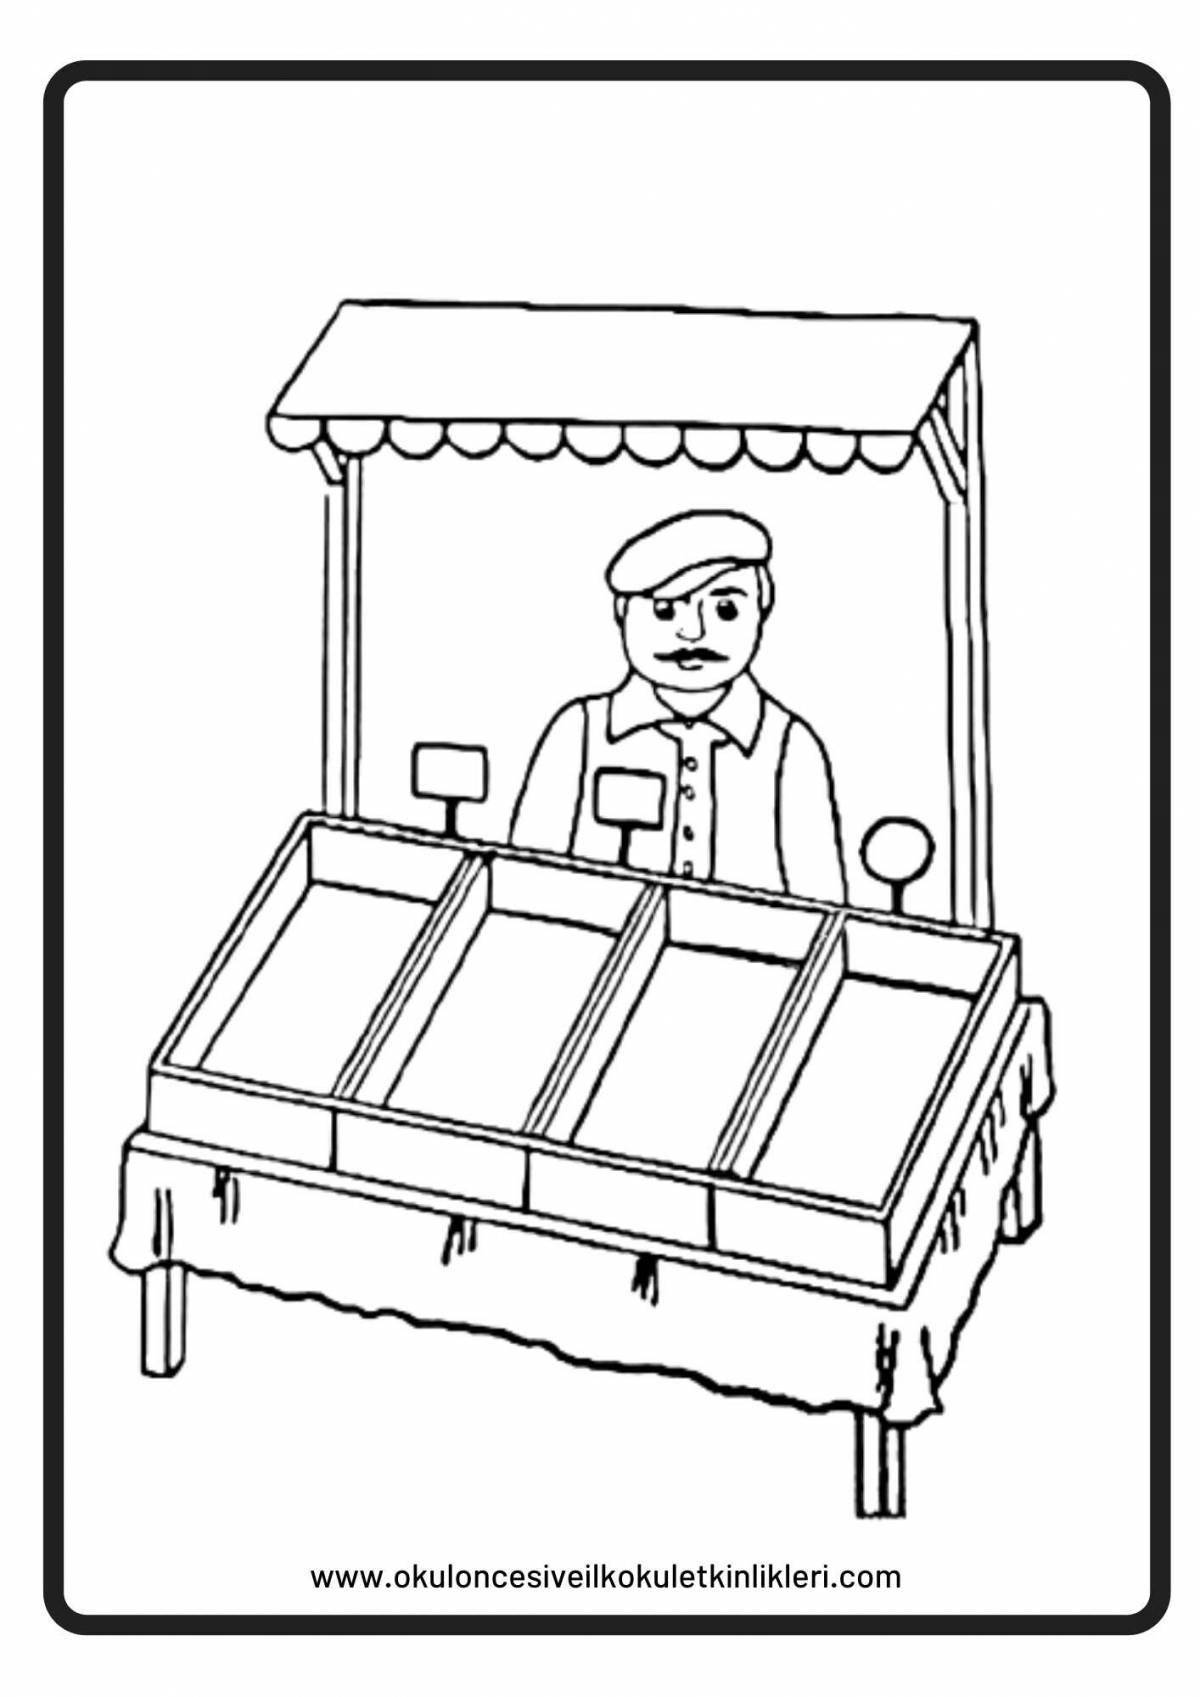 Colorful salesman coloring page for 4-5 year olds